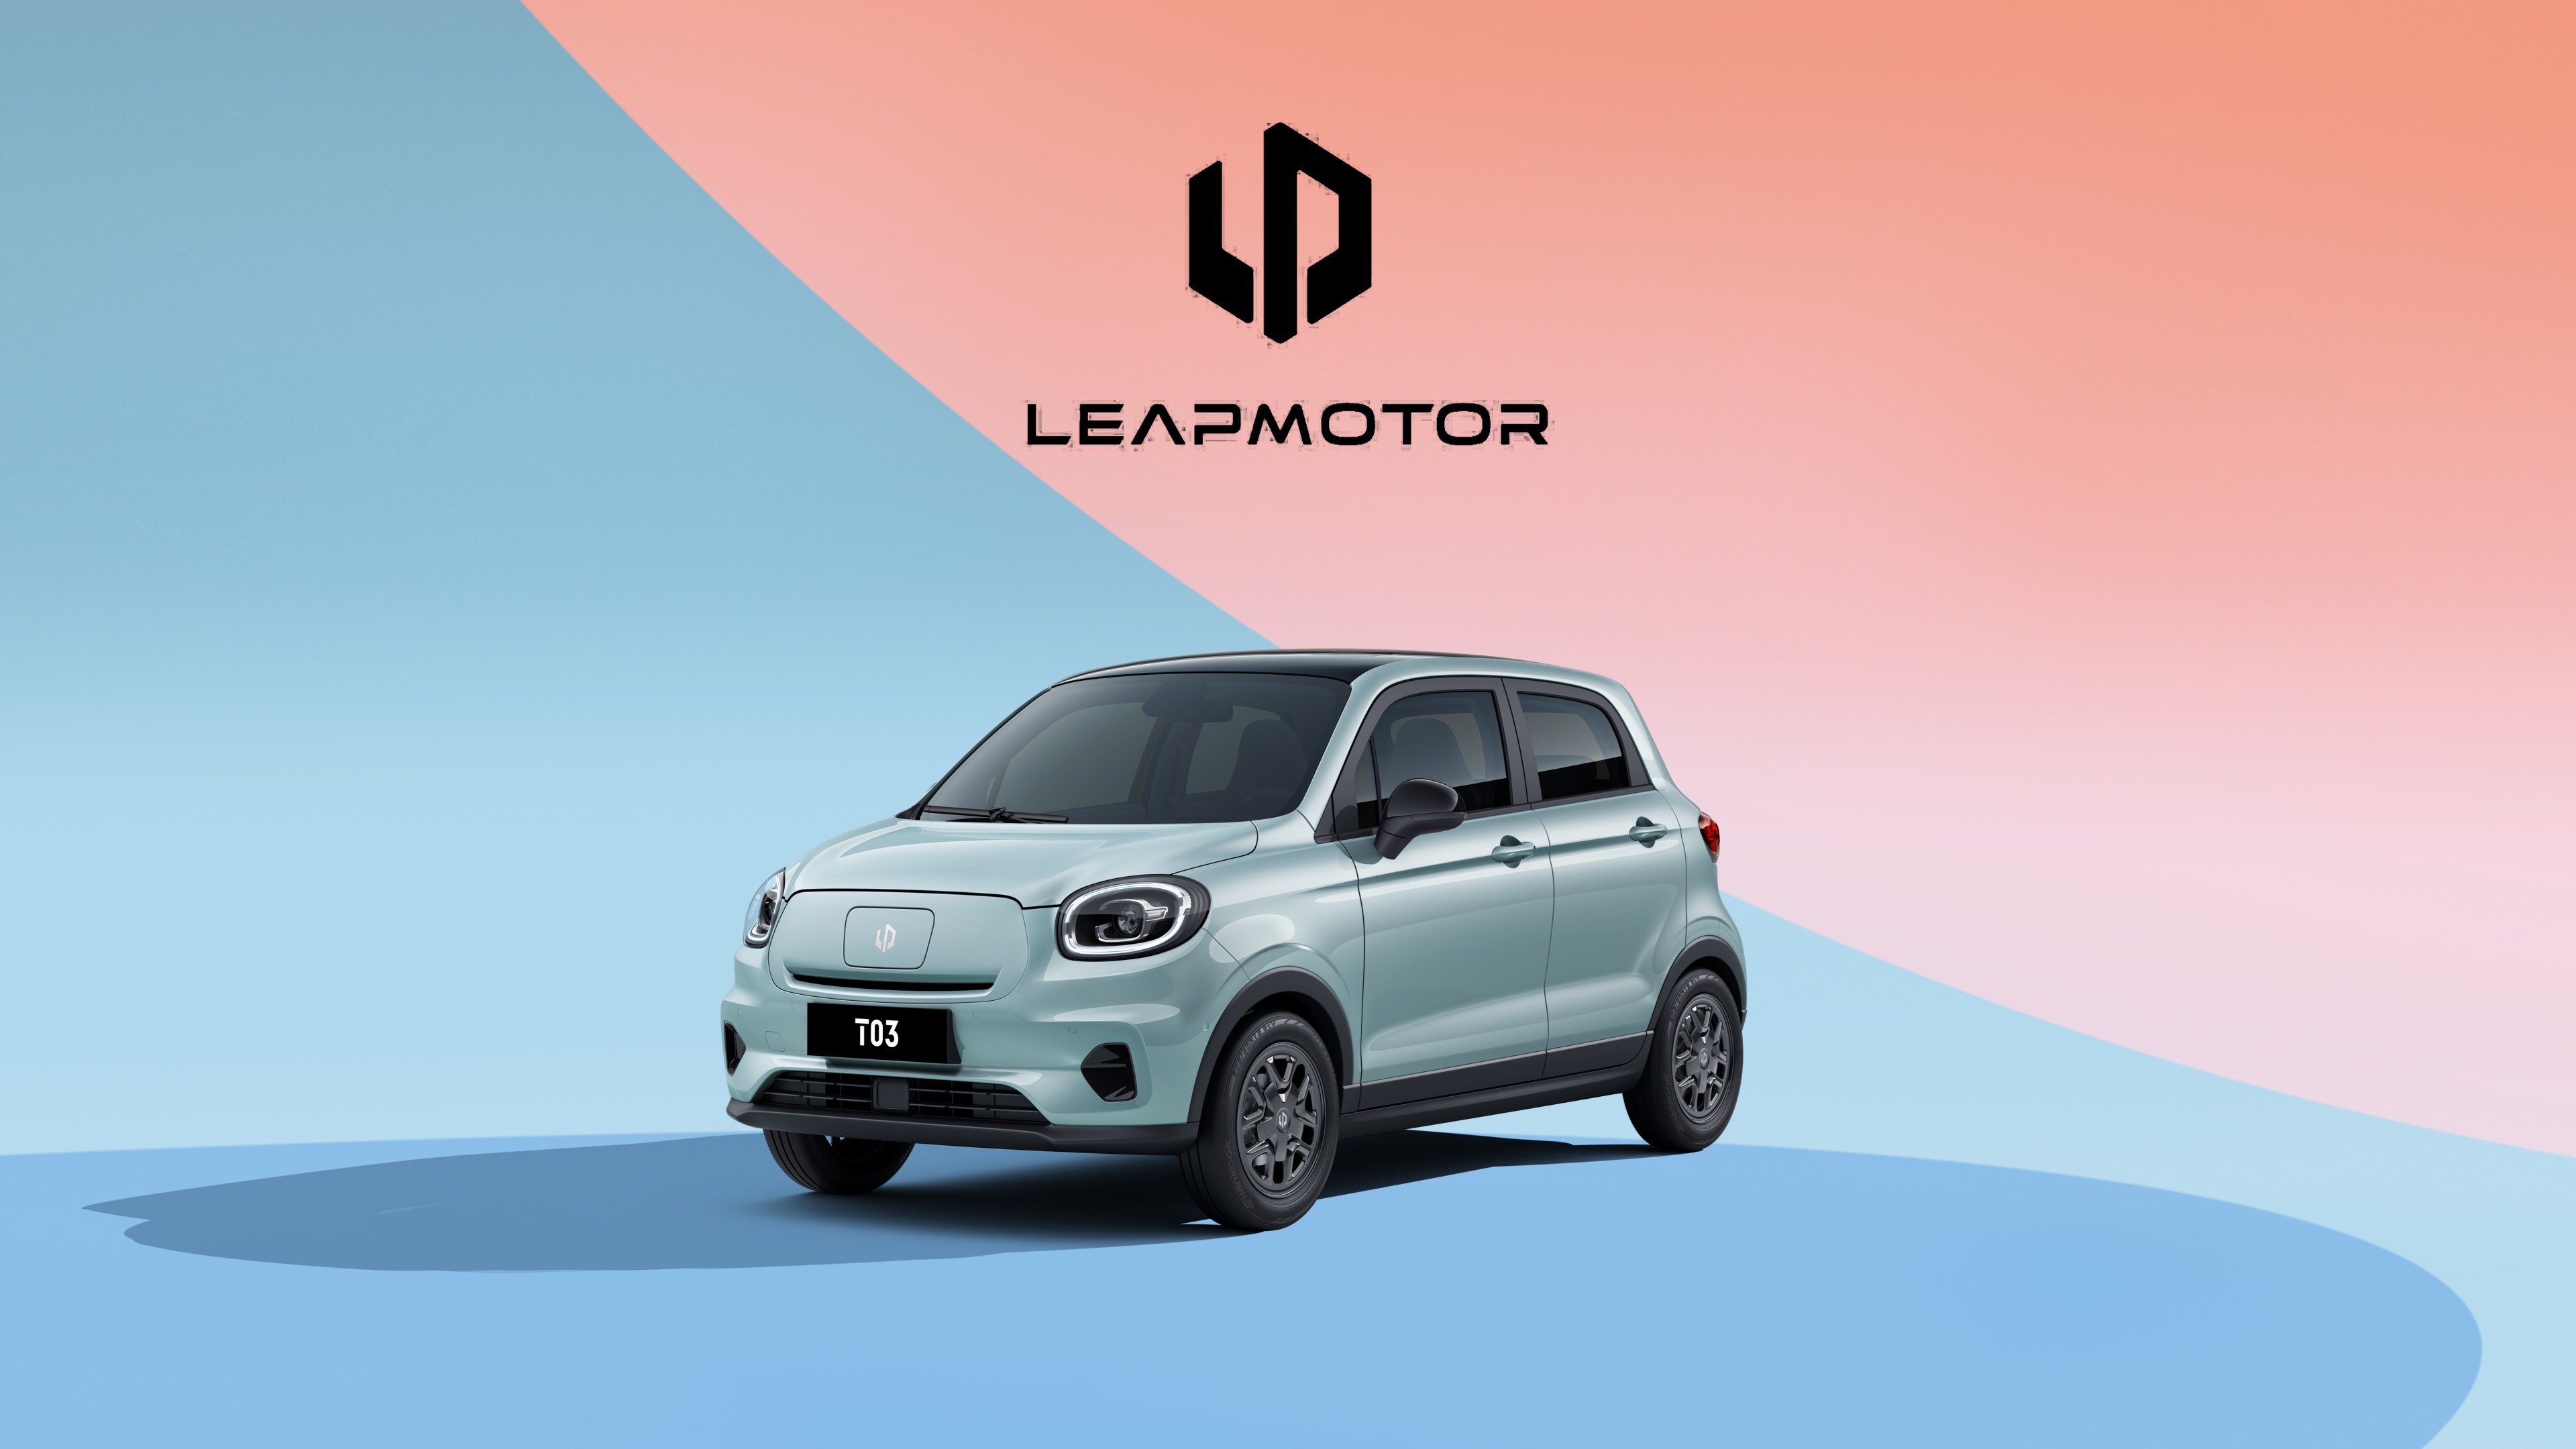 Leapmotor, a Chinese EV maker Partners with Stellantis to Enter Indian EV Market - E-Vehicleinfo